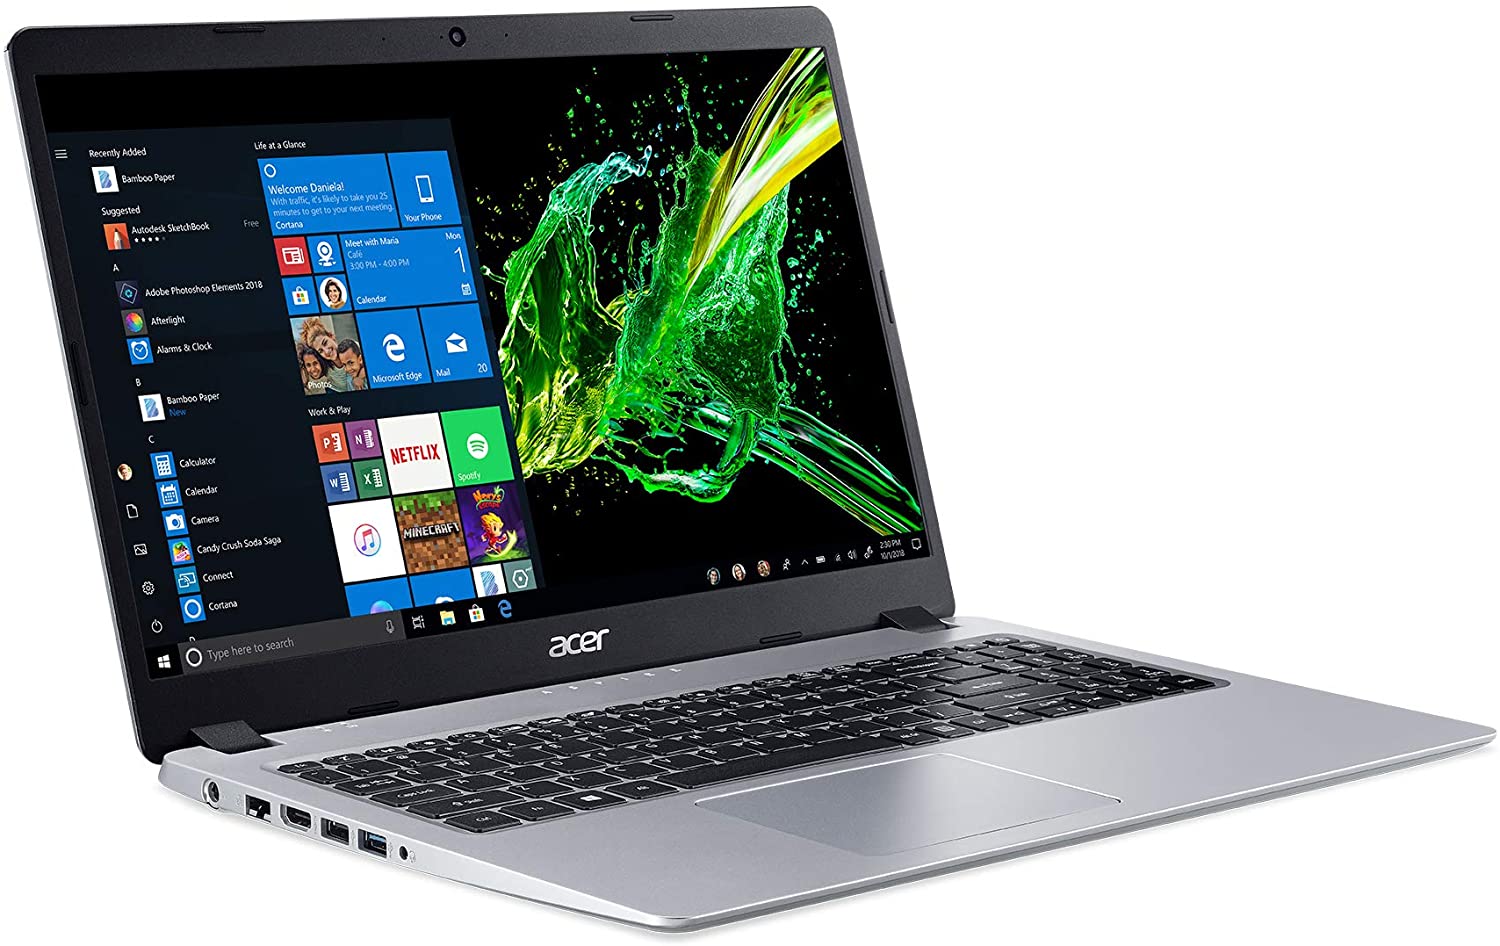 Acer Aspire 5 Slim Laptop, 15.6 inches Full HD IPS Display